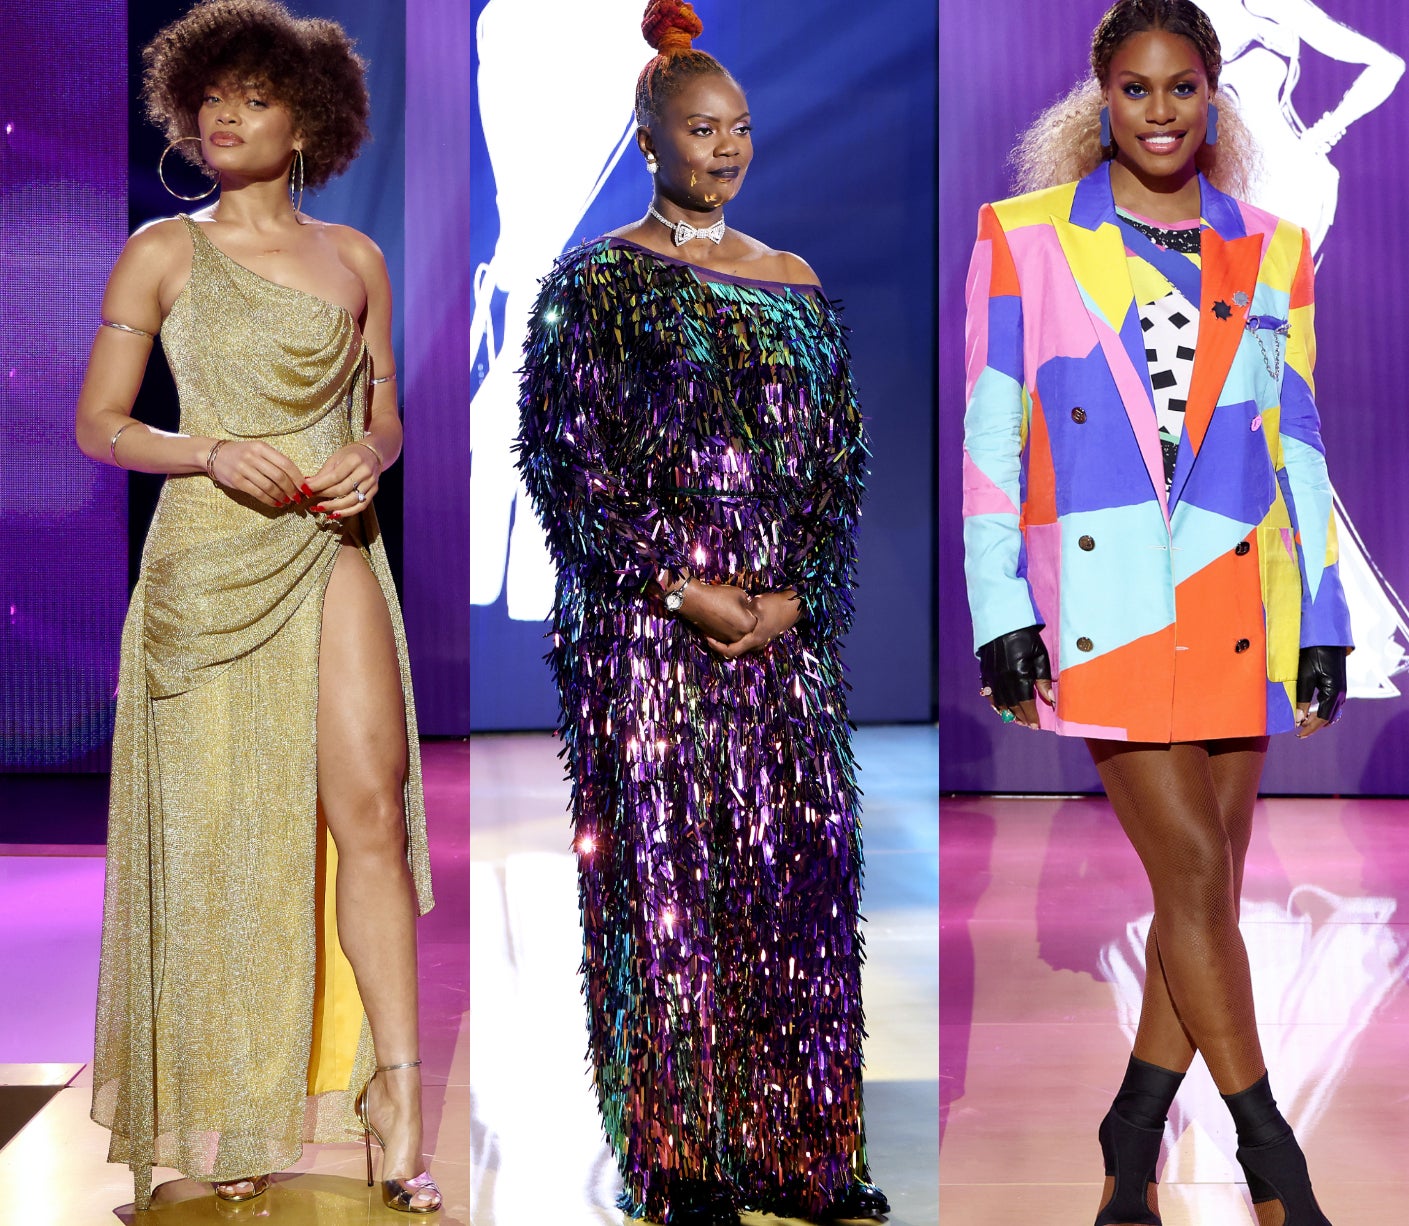 We Loved These Looks From Black Designers At The ESSENCE Black Women In Hollywood Awards